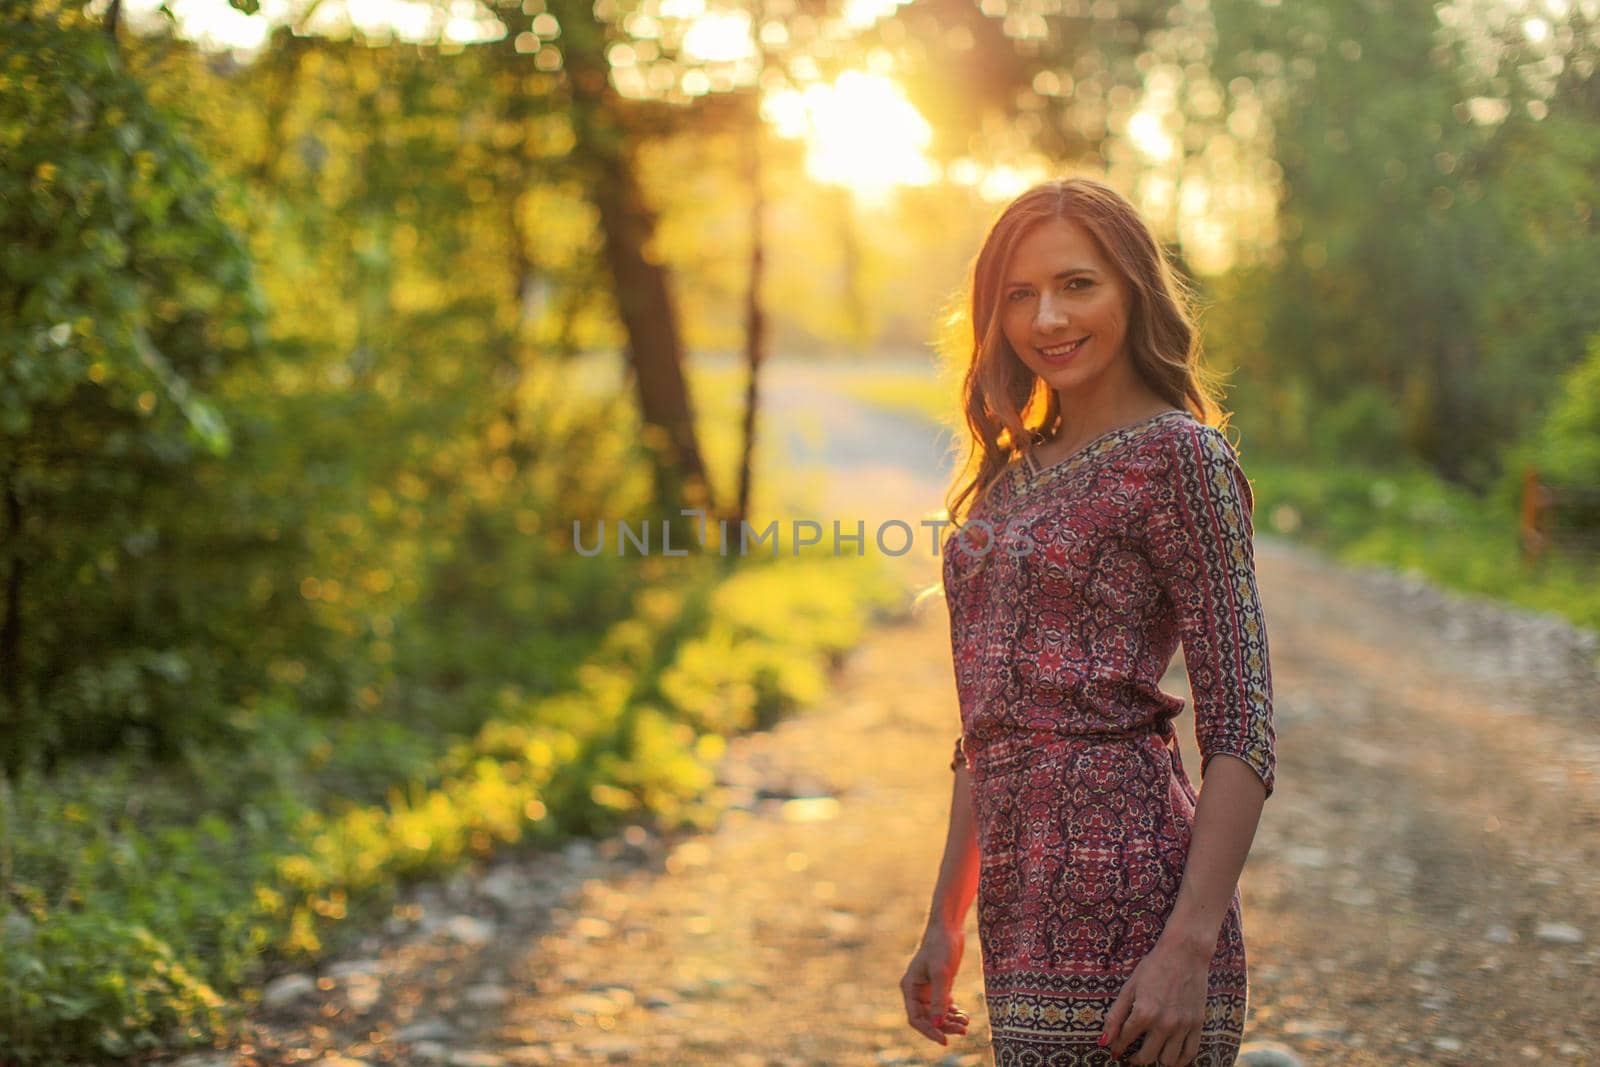 Young woman wearing dress, walking on forest path with golden sunset light in background.